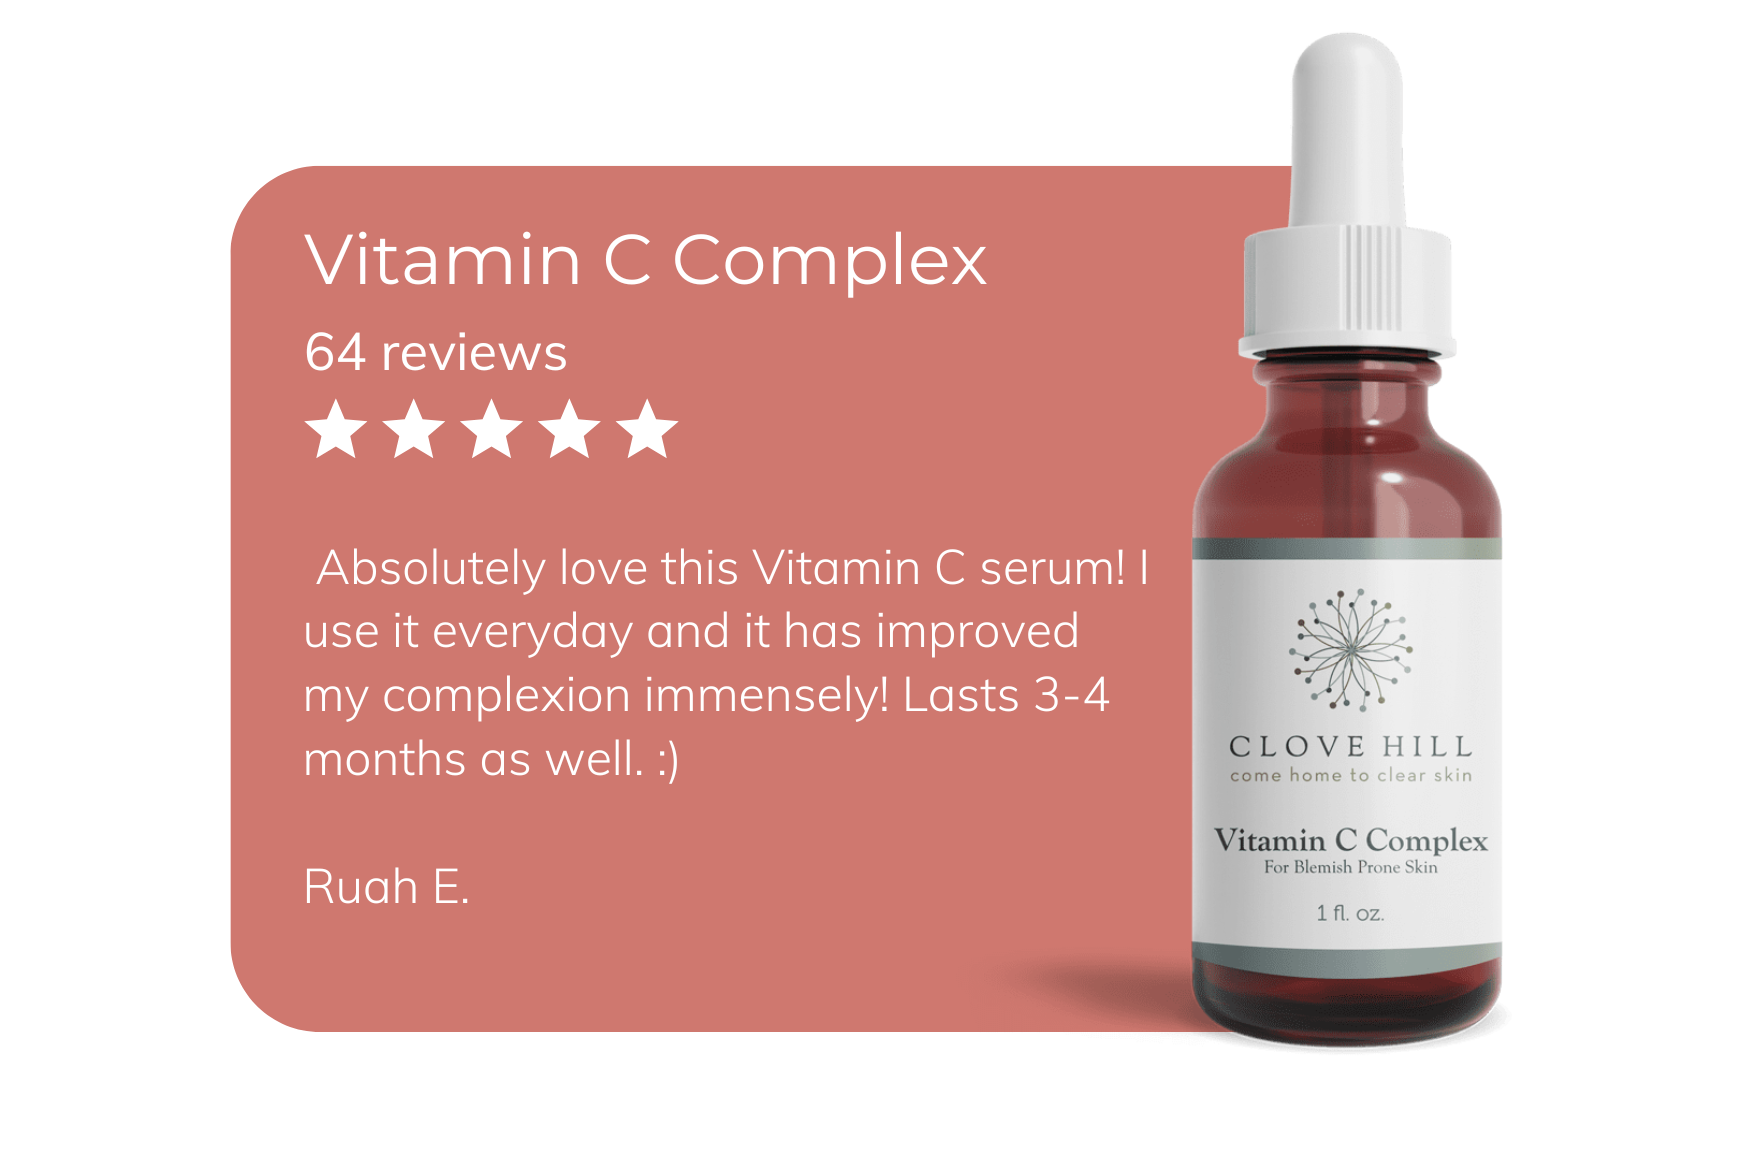 Product image of Clove Hill Complex C Vitamin alongside a review praising its effectiveness in improving skin texture and radiance.